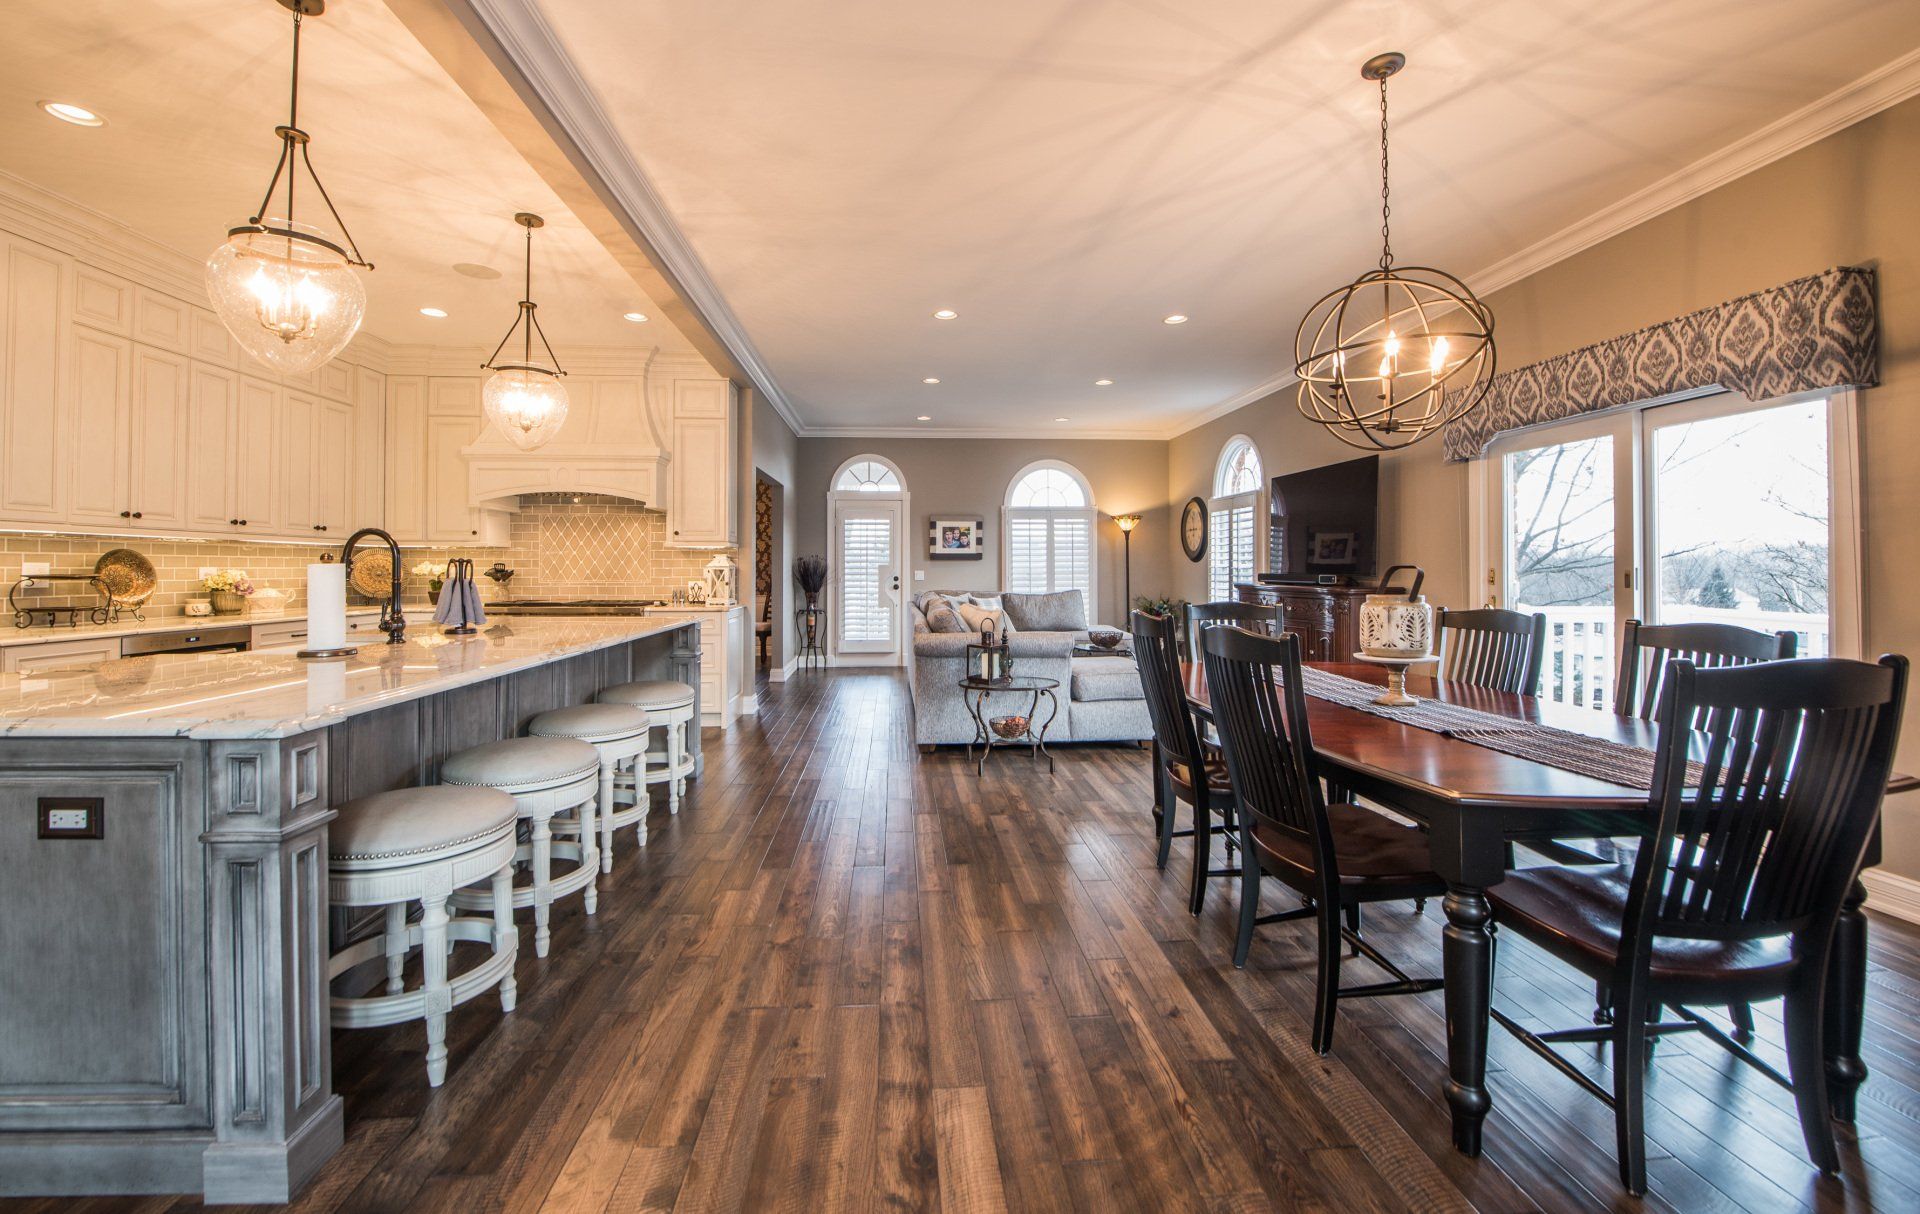 a kitchen , dining room and living room in a house with hardwood floors .